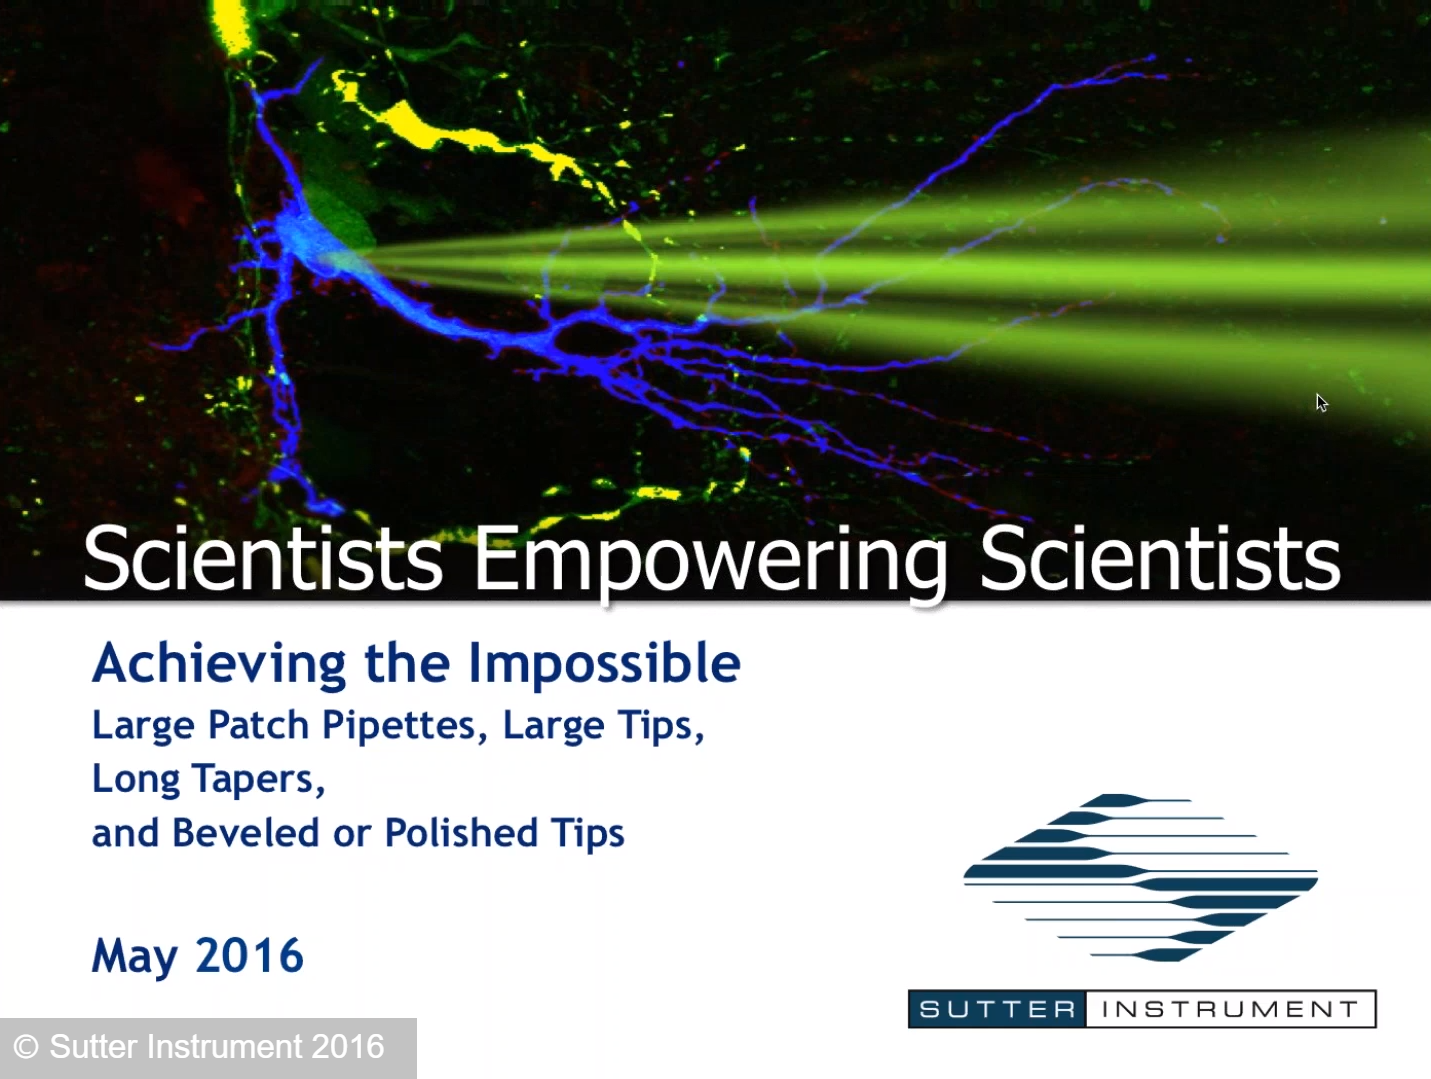 Achieving the Impossible - Scientists Empowering Scientists